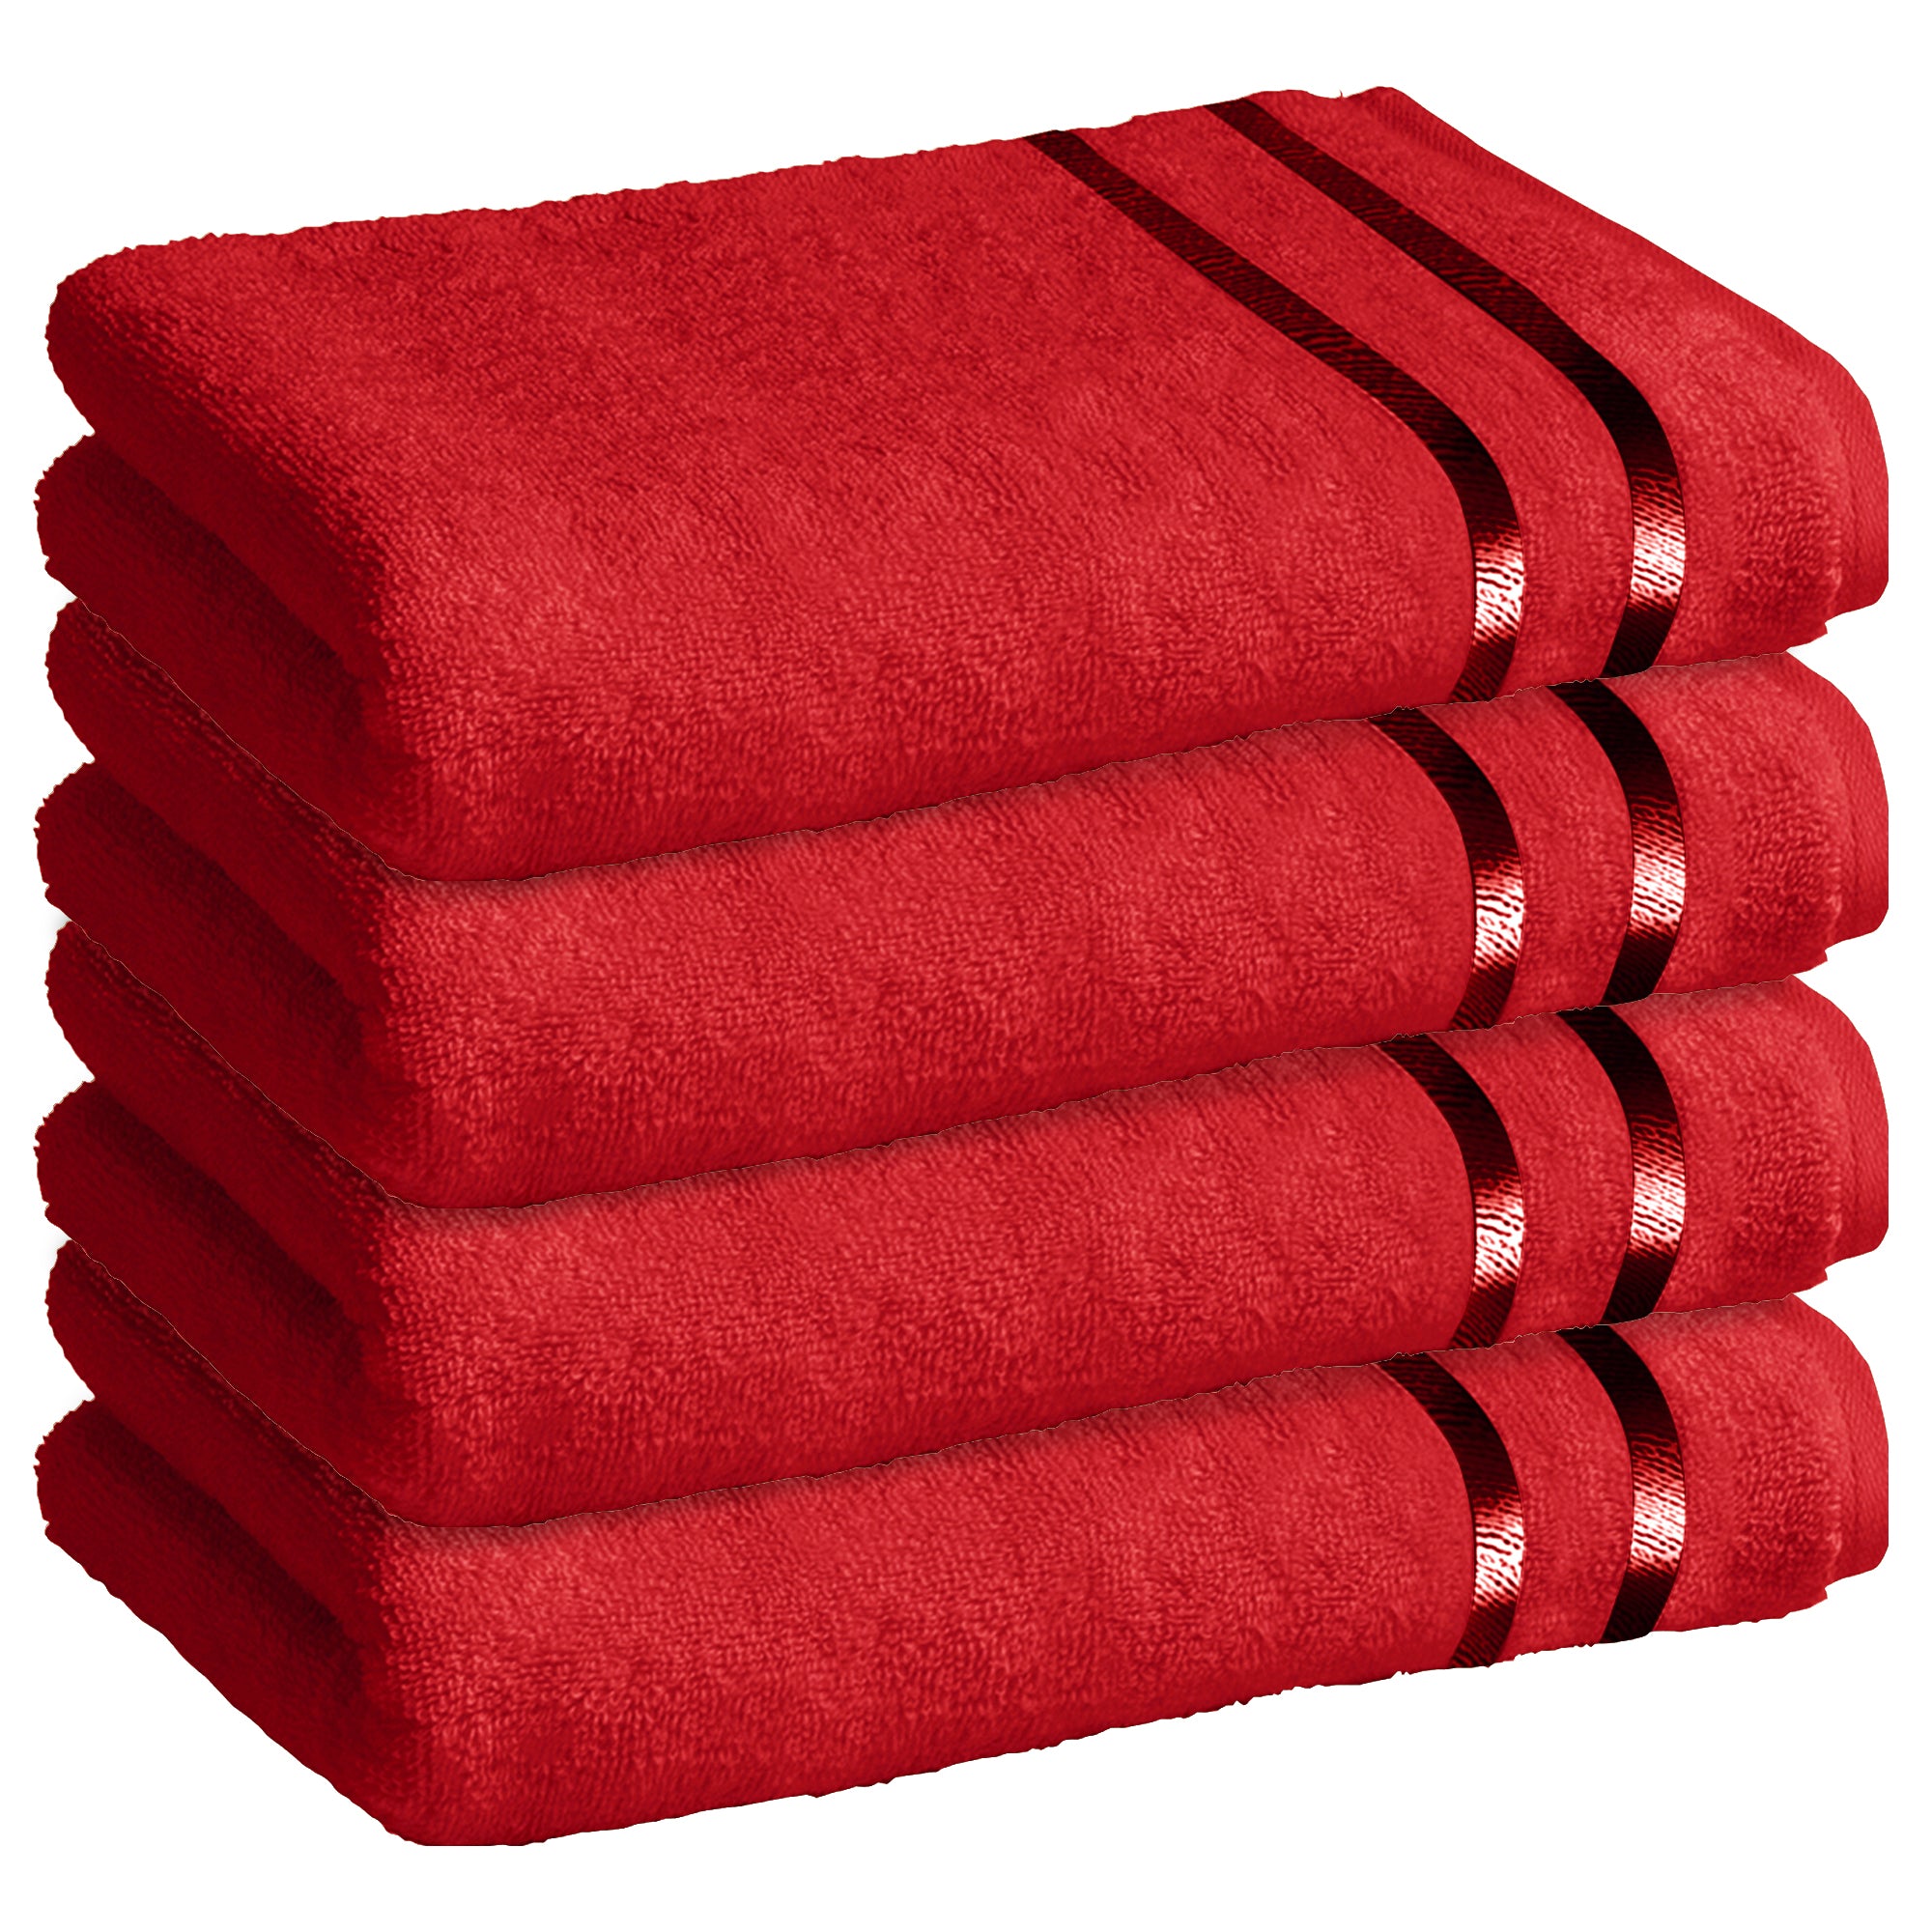 Story@Home 4 Units 100% Cotton Bath Towel - Wine Red